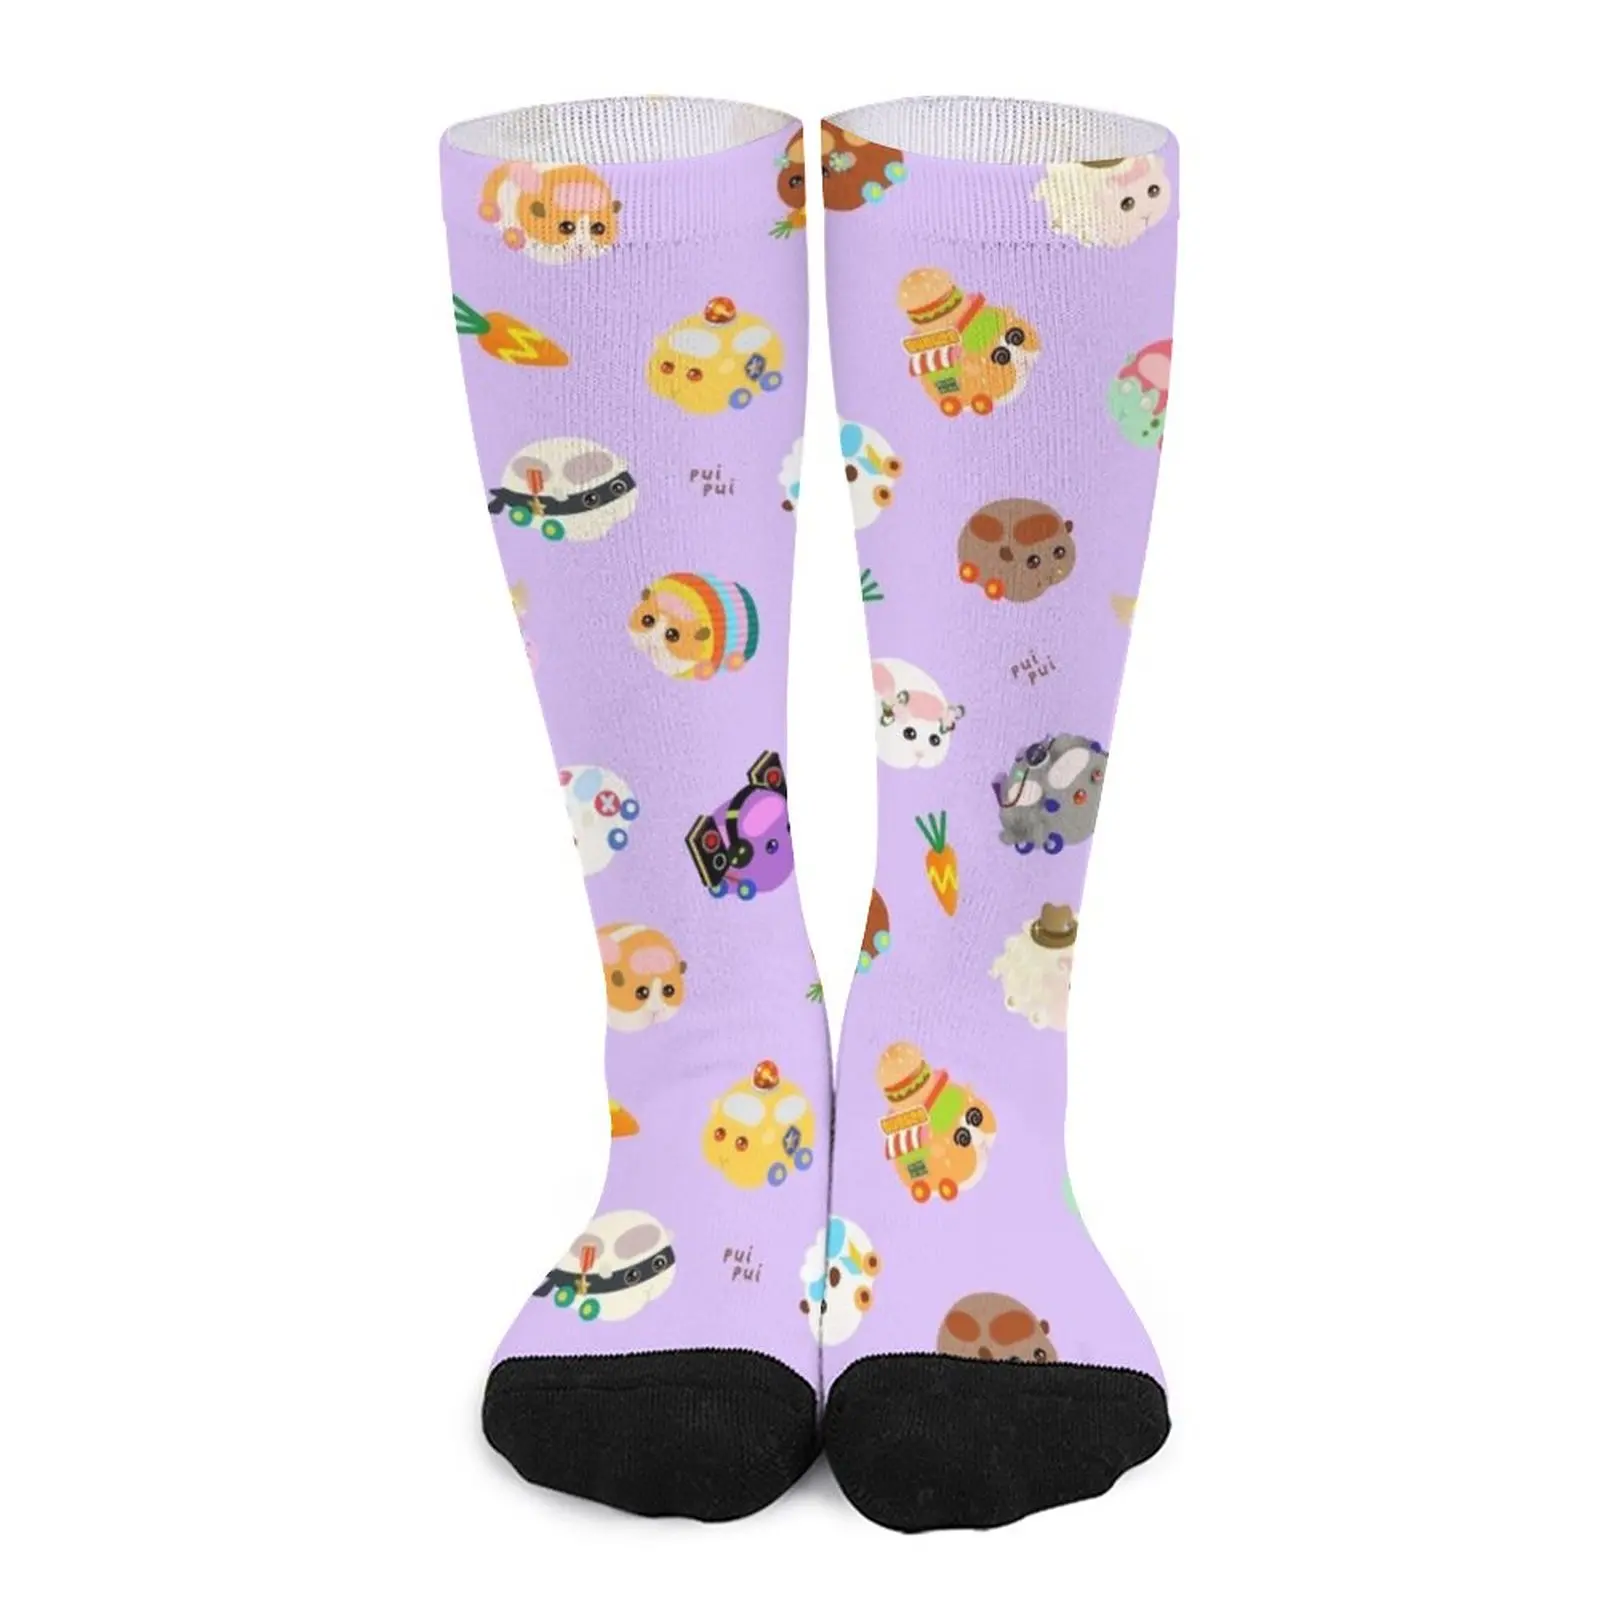 Pui Pui Molcar Assorted Characters Toss Design - Purple Socks Womens socks compression socks Women Rugby tequila made me do it funny quote alcohol 5 cinco de mayo design socks compression socks women luxury socks